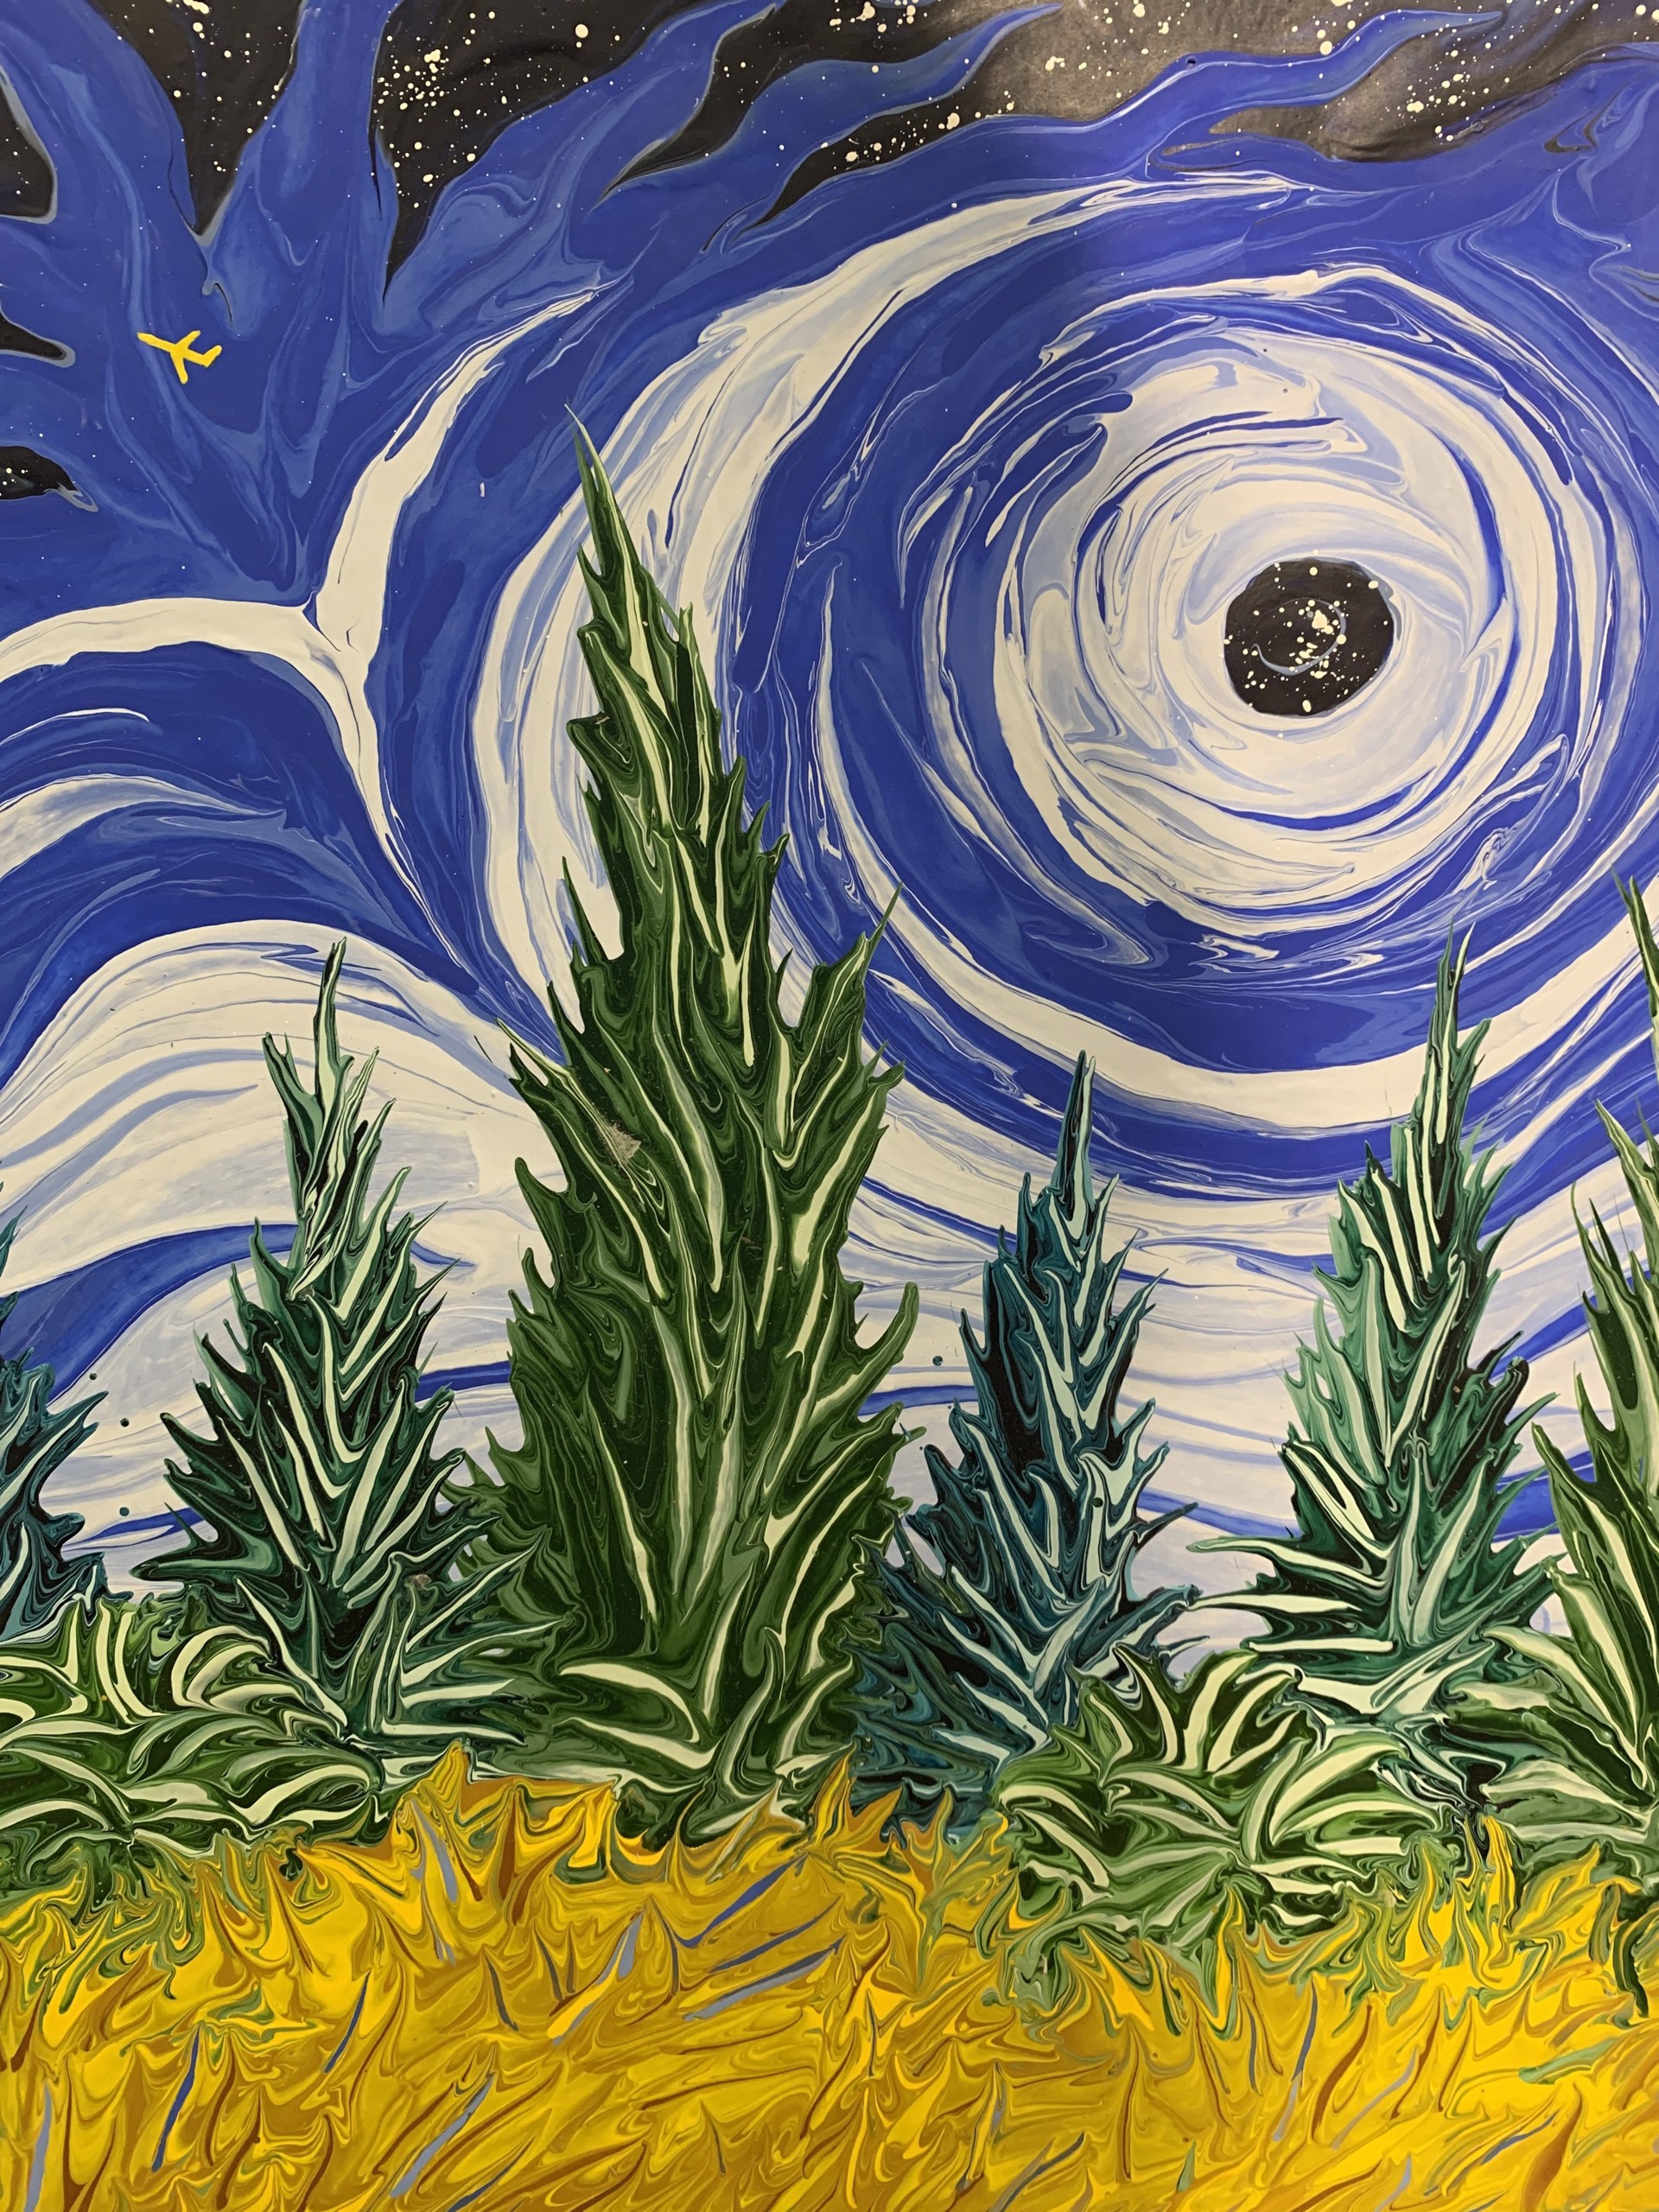 Blue Sky with Black Hole Over Yellow Wheatfield by Gregory Horndeski